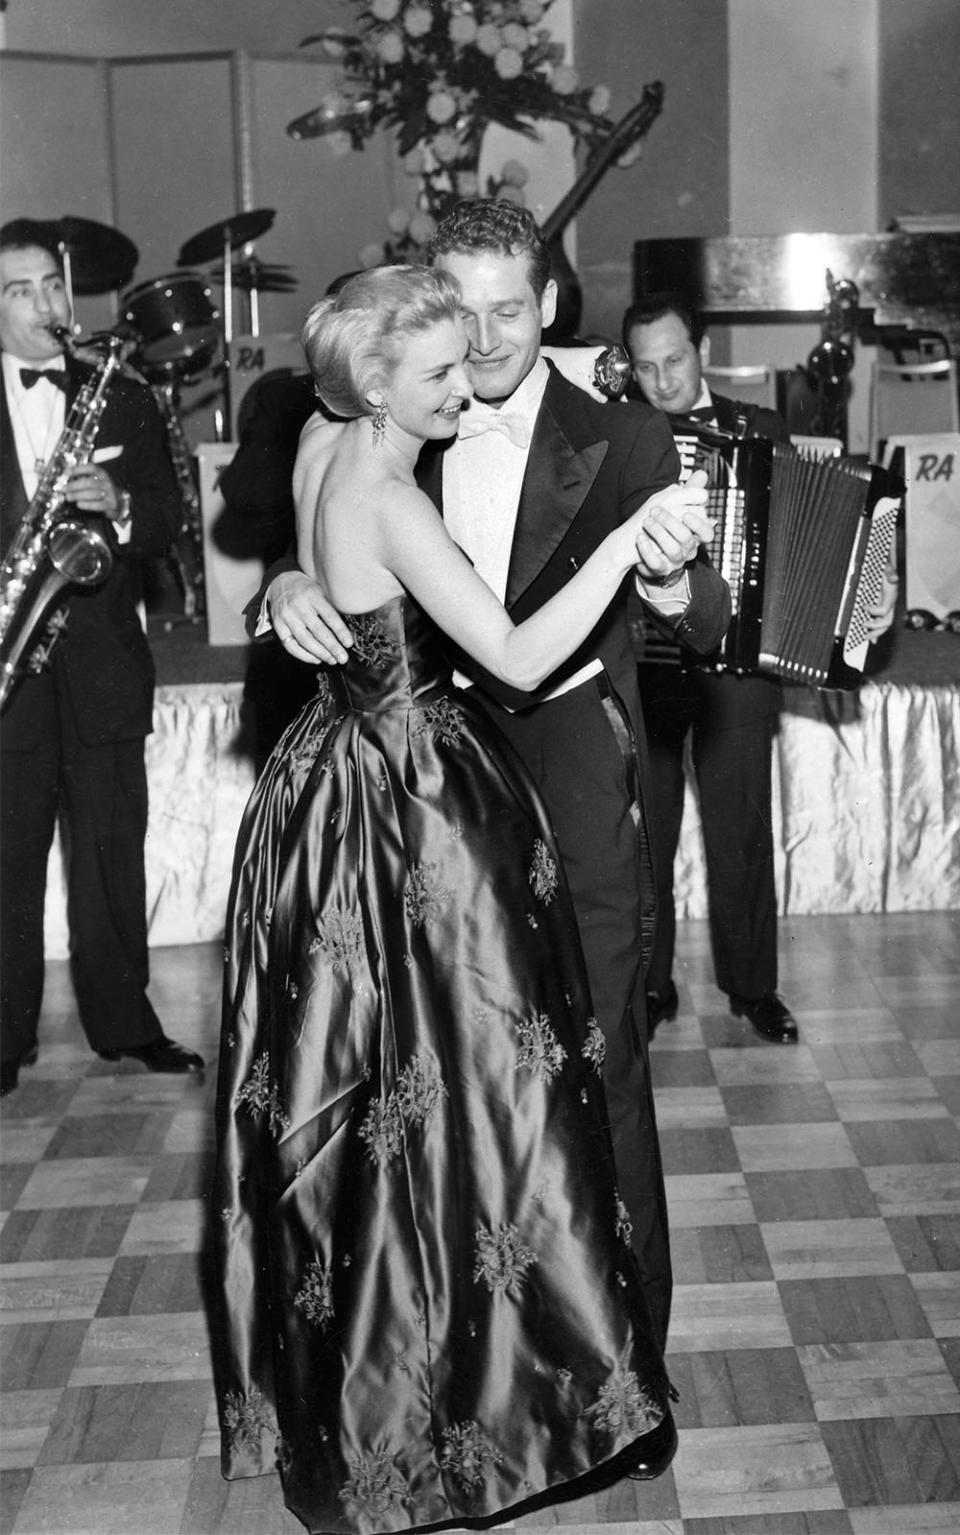 As they danced to the music of the Ray Anthony Band at the first Governors Ball on March 26, 1958, at the Beverly Hilton Hotel, Paul Newman and Joanne Woodward were the evening’s golden couple. The two had married that January, and their first film together, the steamy melodrama The Long, Hot Summer, had just been released. Earlier that evening Woodward had been awarded the best actress Oscar for the psychological drama The Three Faces of Eve beating out such established stars as Deborah Kerr, Lana Turner and Elizabeth Taylor.